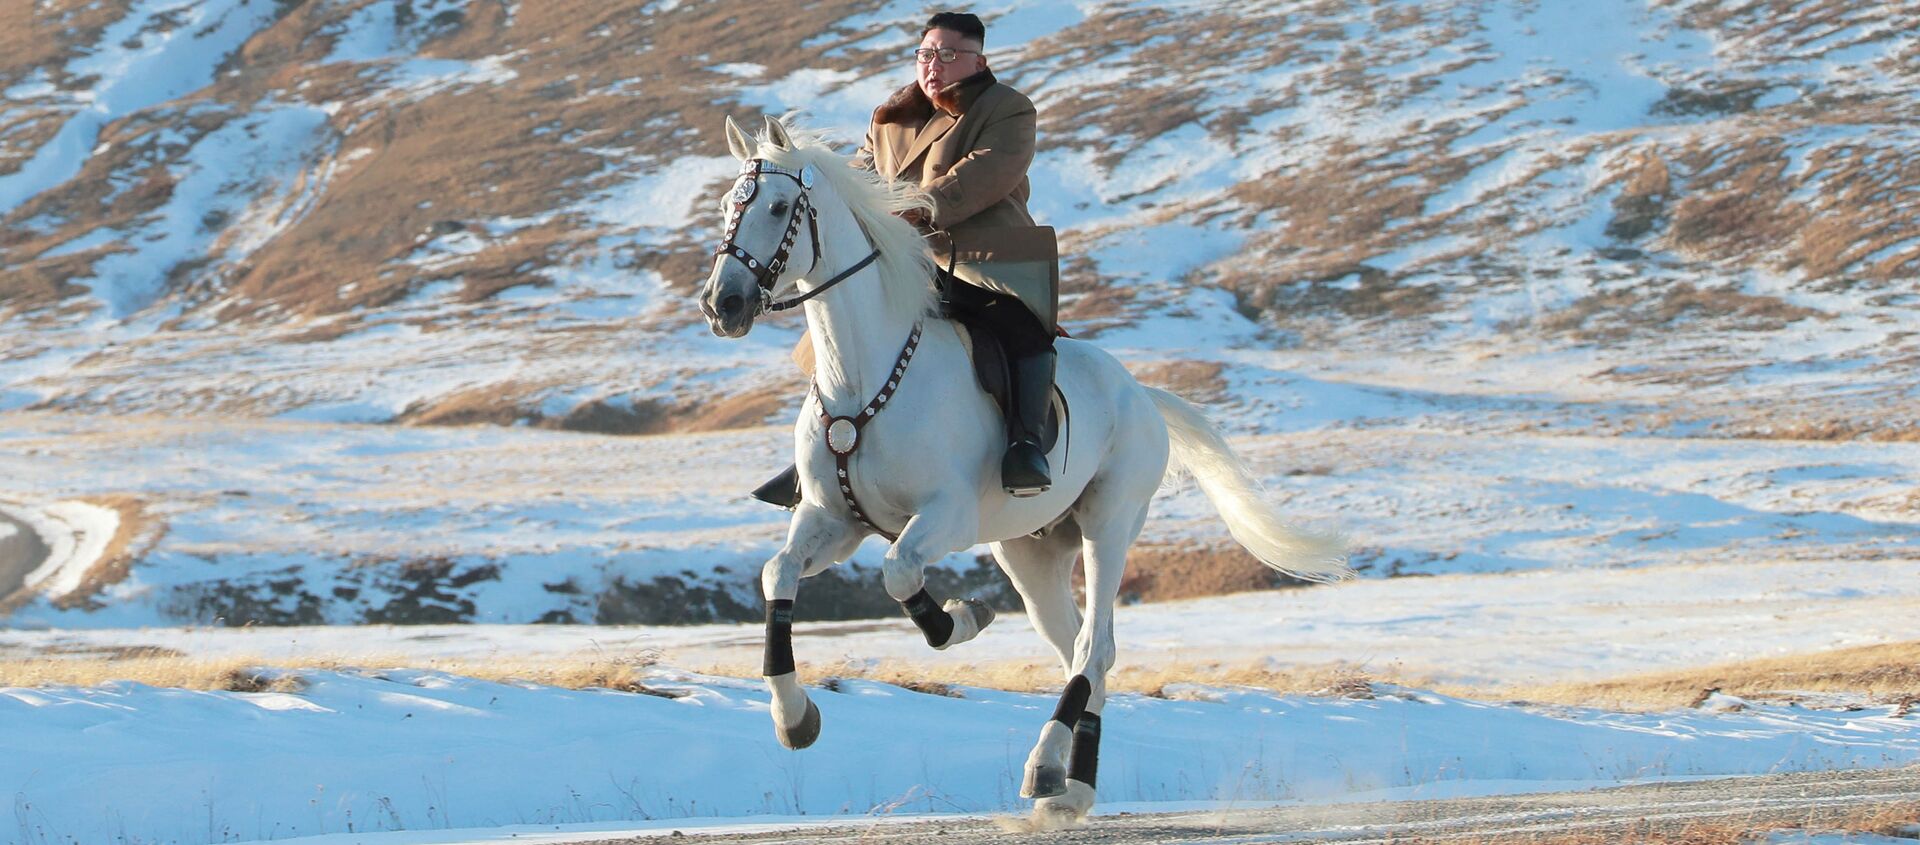 North Korean leader Kim Jong Un rides a horse during snowfall in Mount Paektu in this image released by North Korea's Korean Central News Agency (KCNA) on October 16, 2019 - Sputnik International, 1920, 16.10.2019